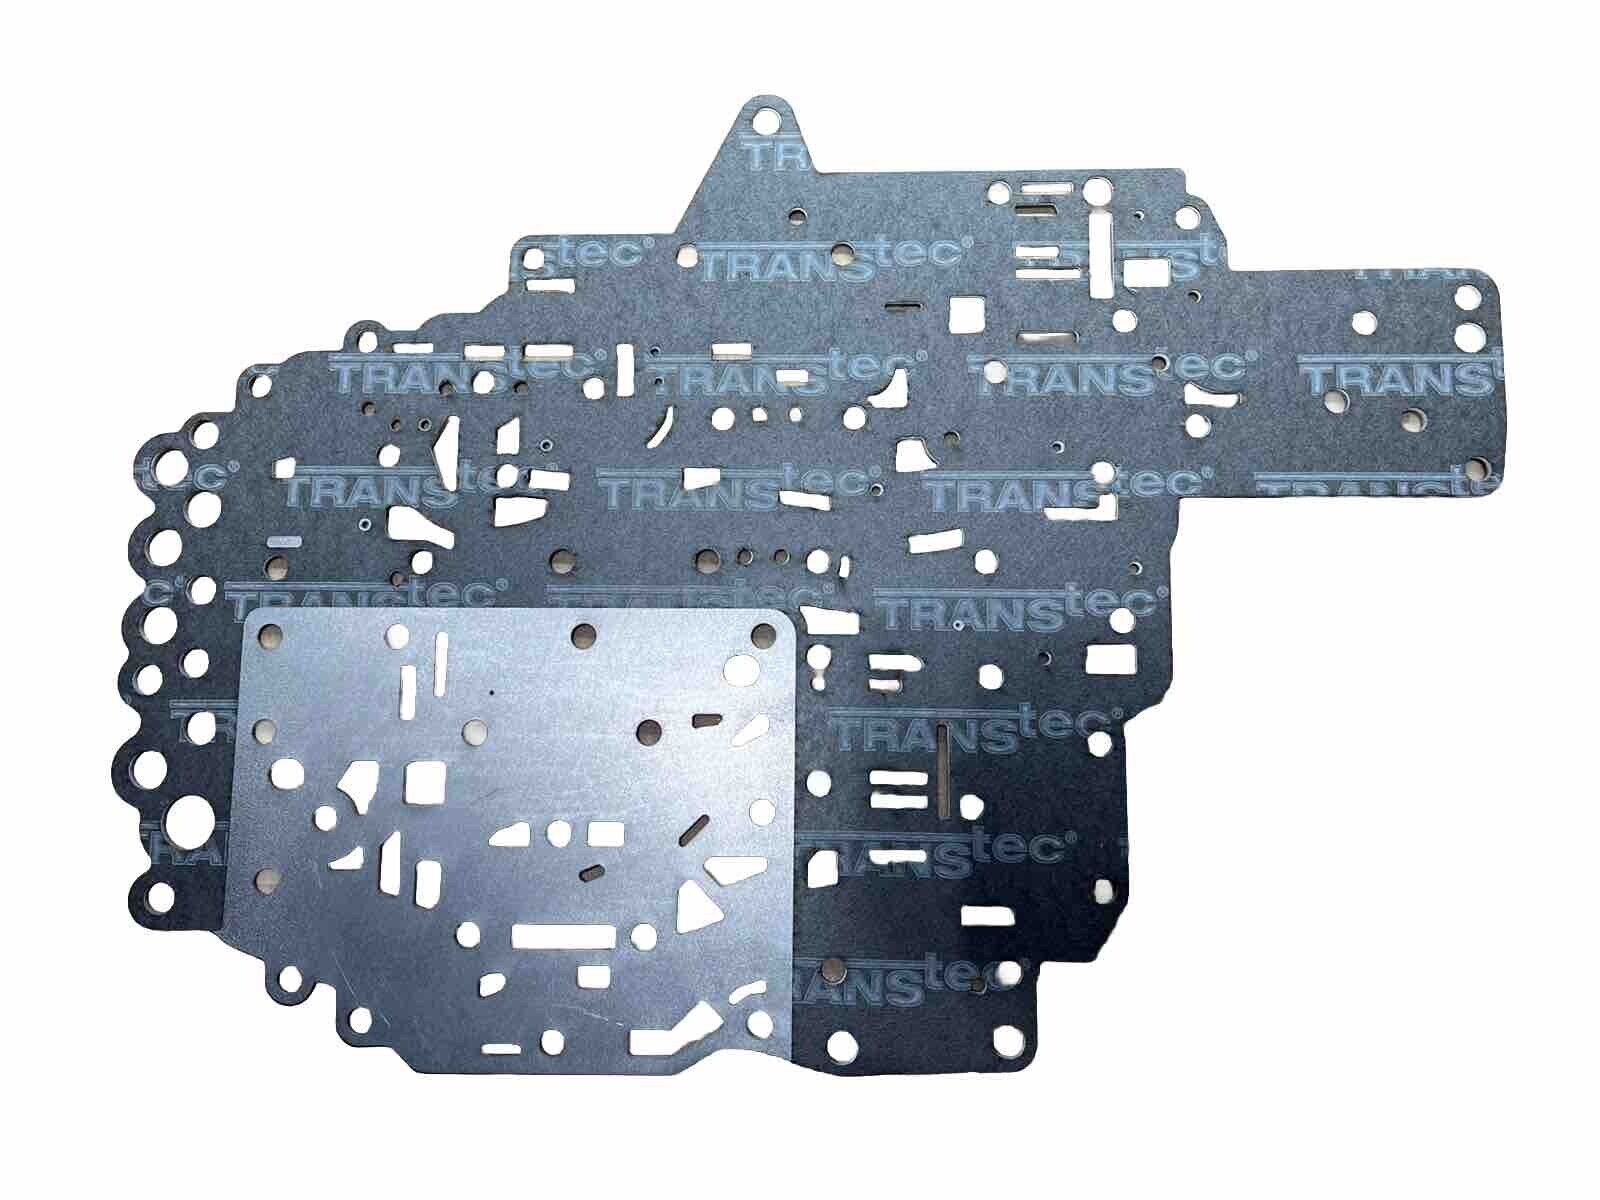 68RFE Valve Body Separator Plate With Gaskets, 2019-Up, Blocked Plate For Tuning